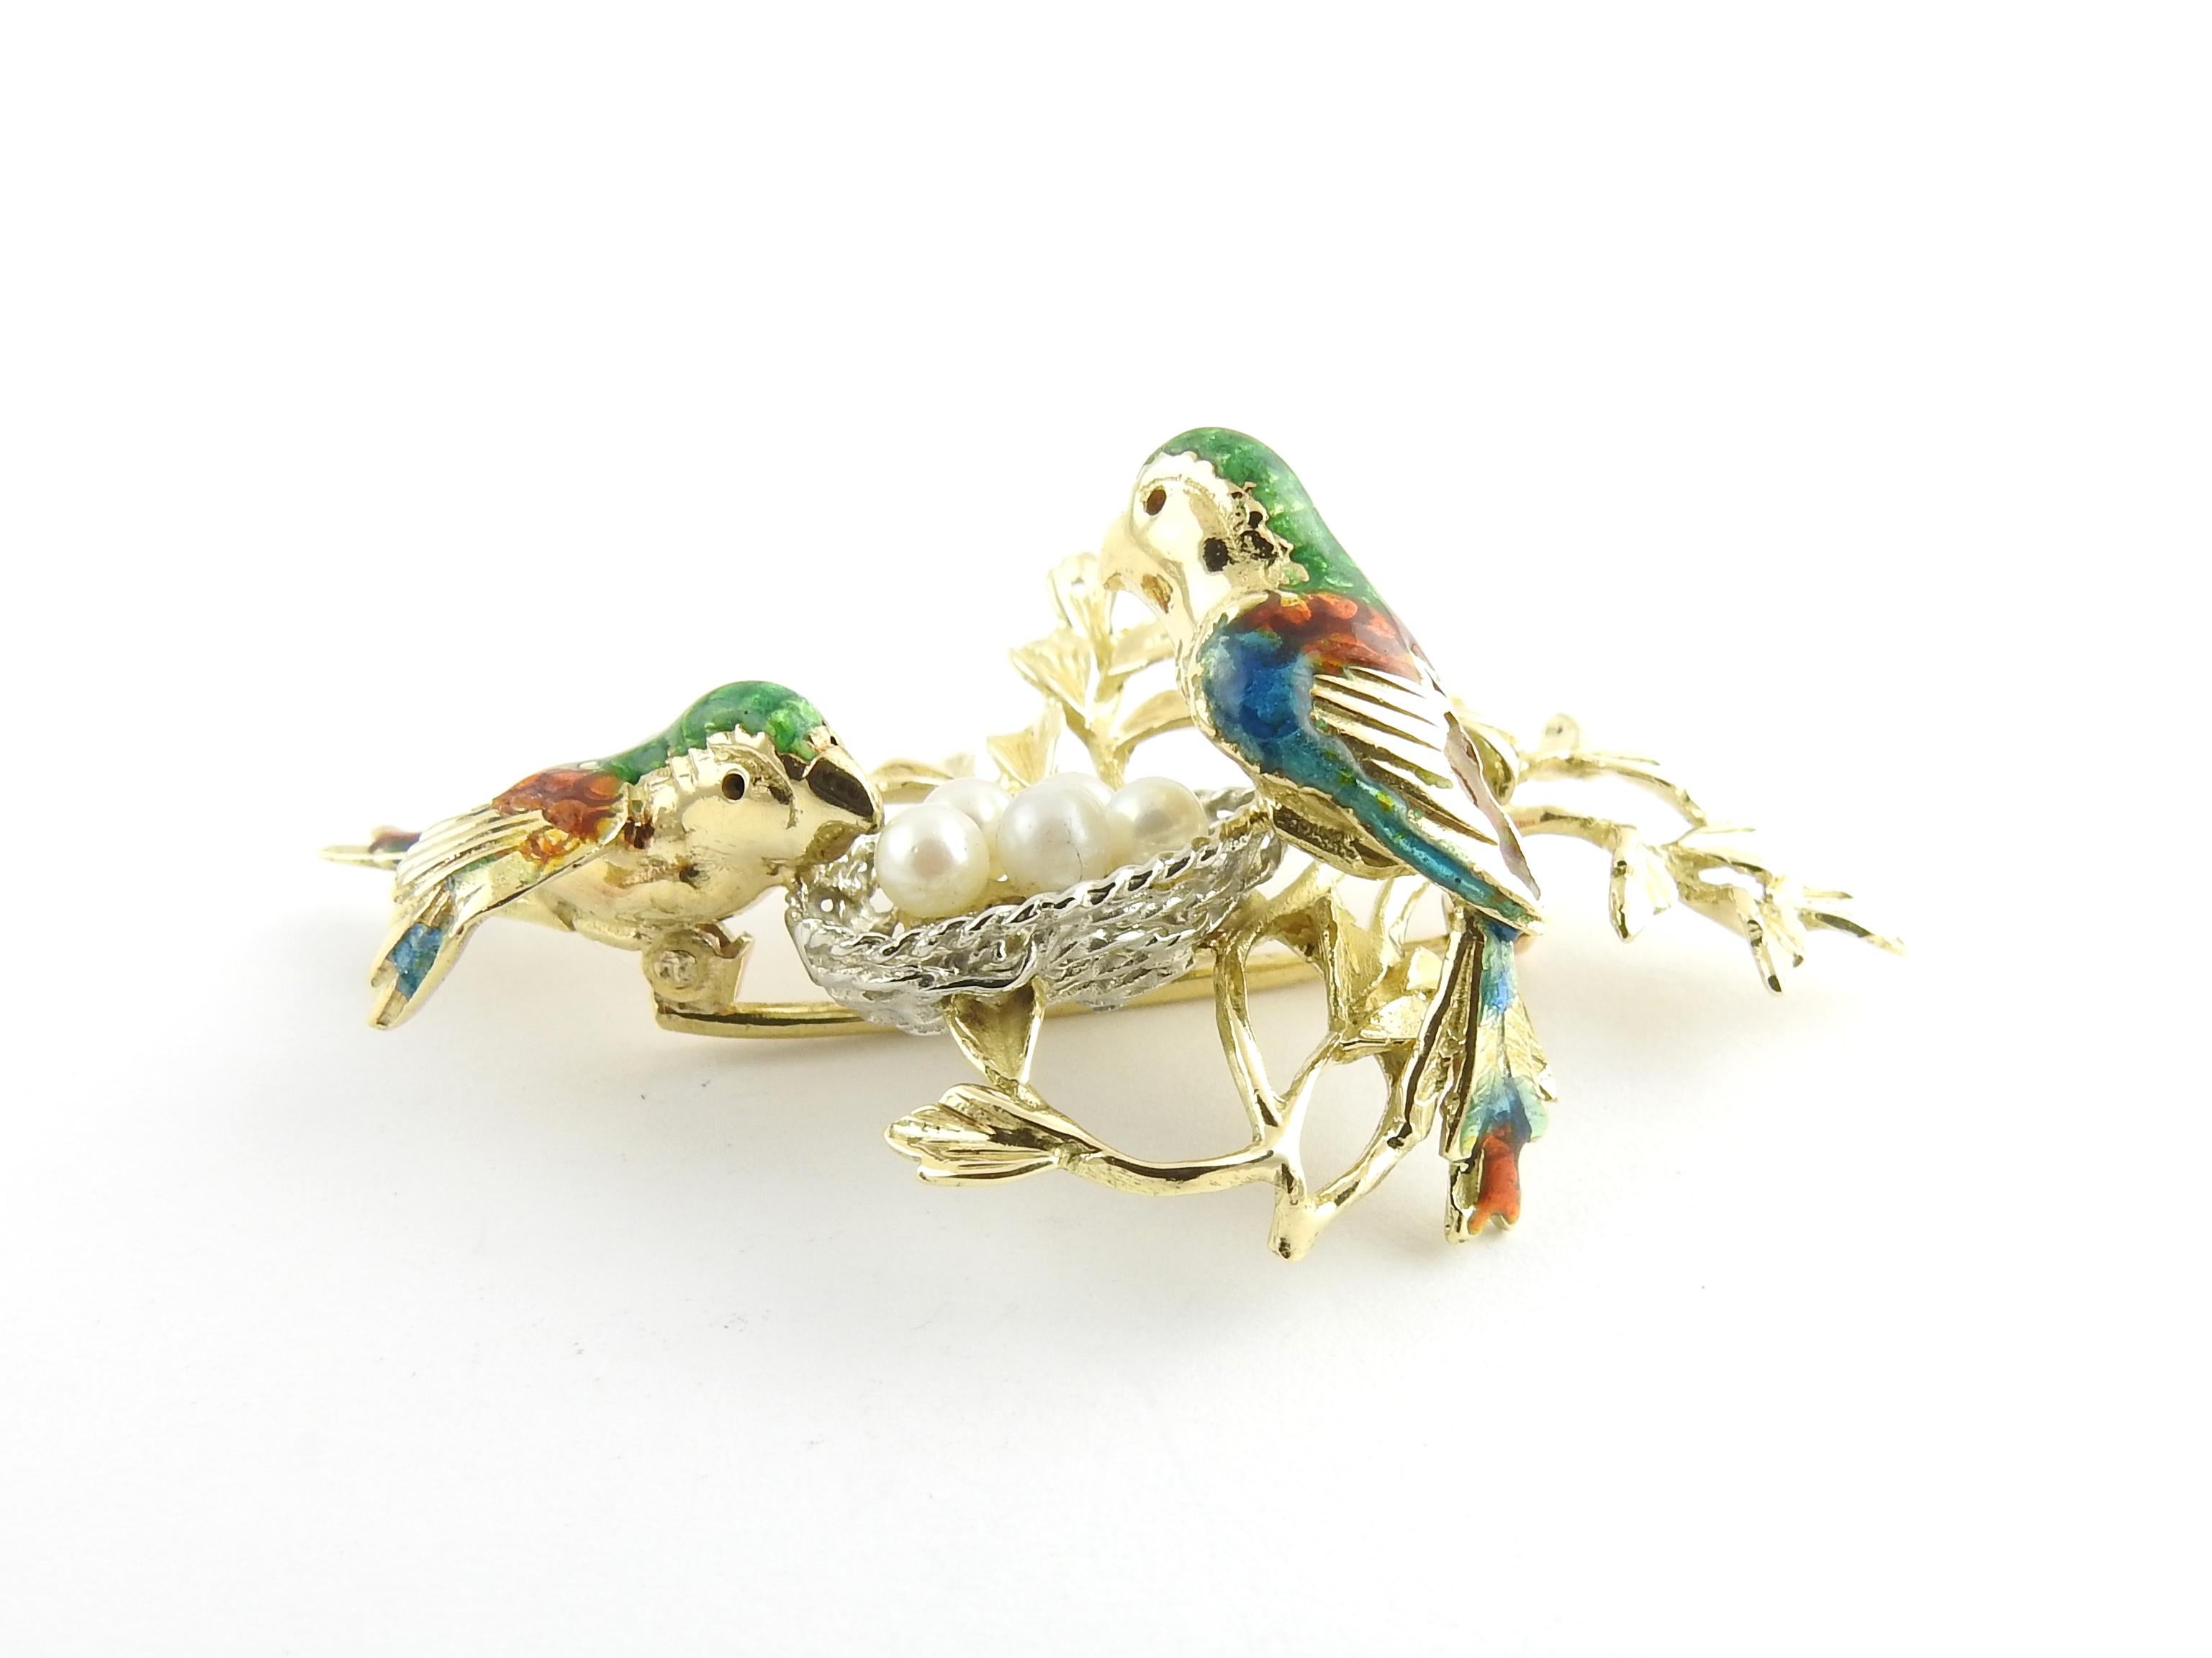 Vintage 18 Karat Yellow and White Gold and Pearls Birds in Nest Brooch/Pendant-

This stunning 3d brooch features two colorful birds tending their nest of 